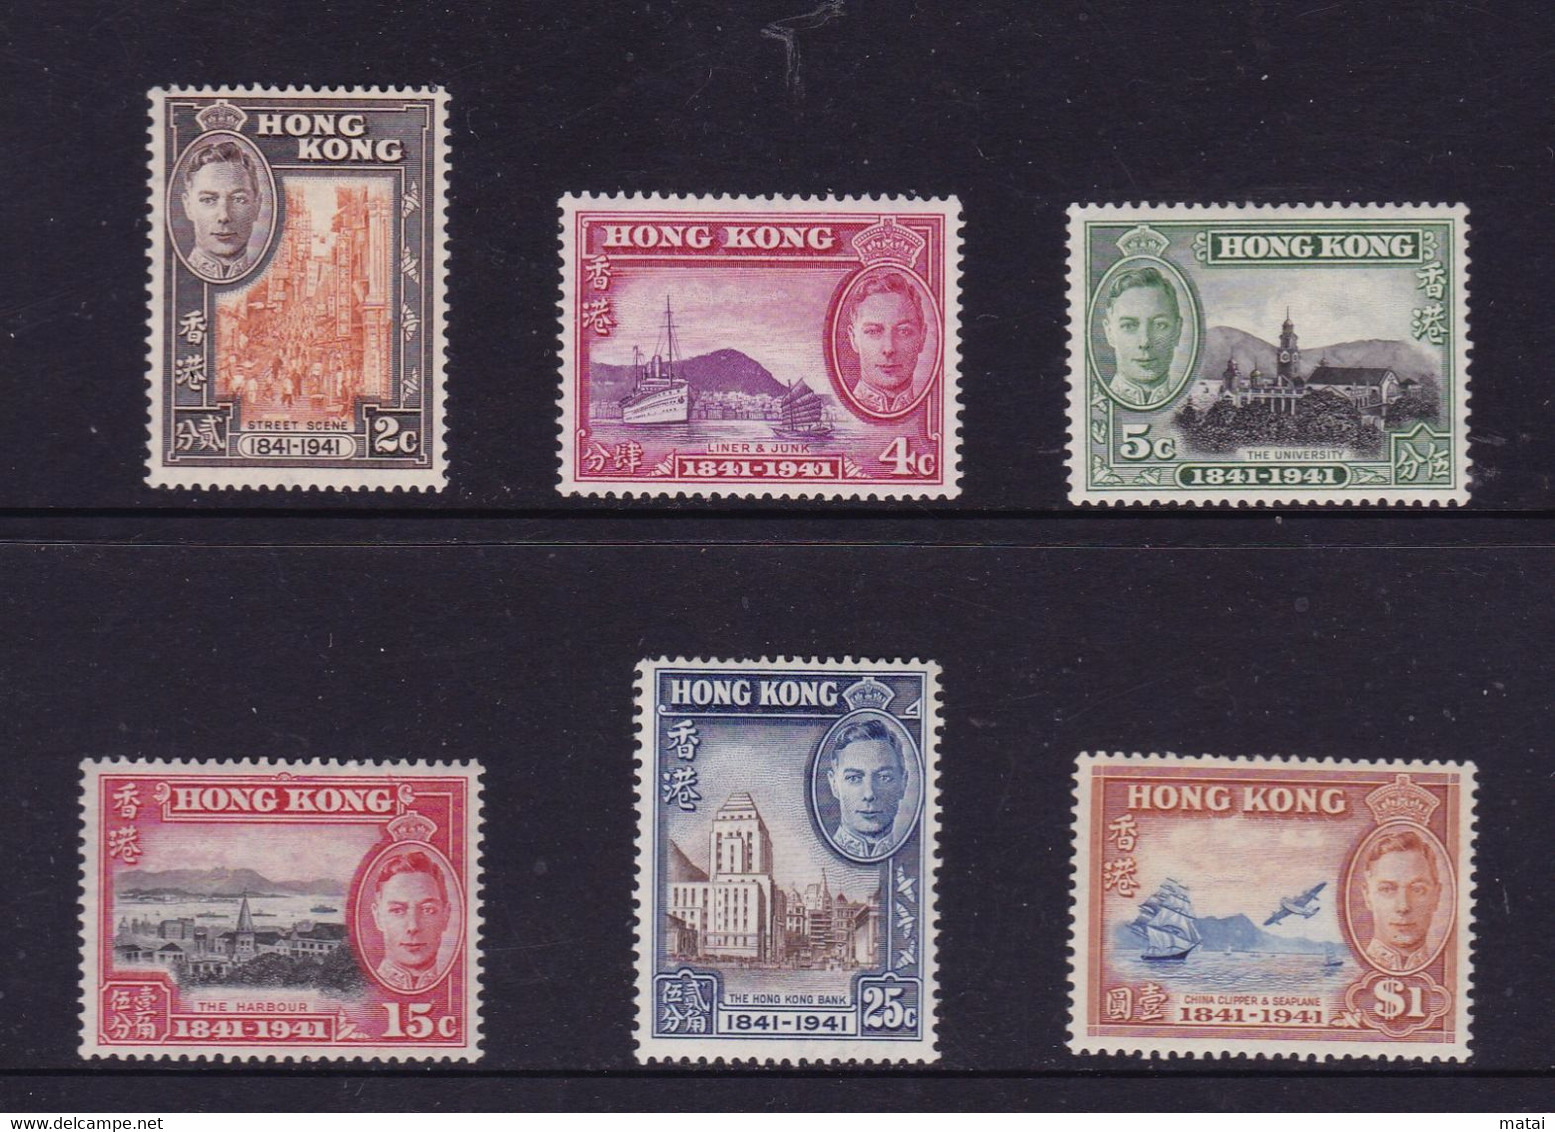 HONG KONG 1941, "Centenary Of British Occupation", Serie Mint, Trace Of Hinge - 1941-45 Japanese Occupation